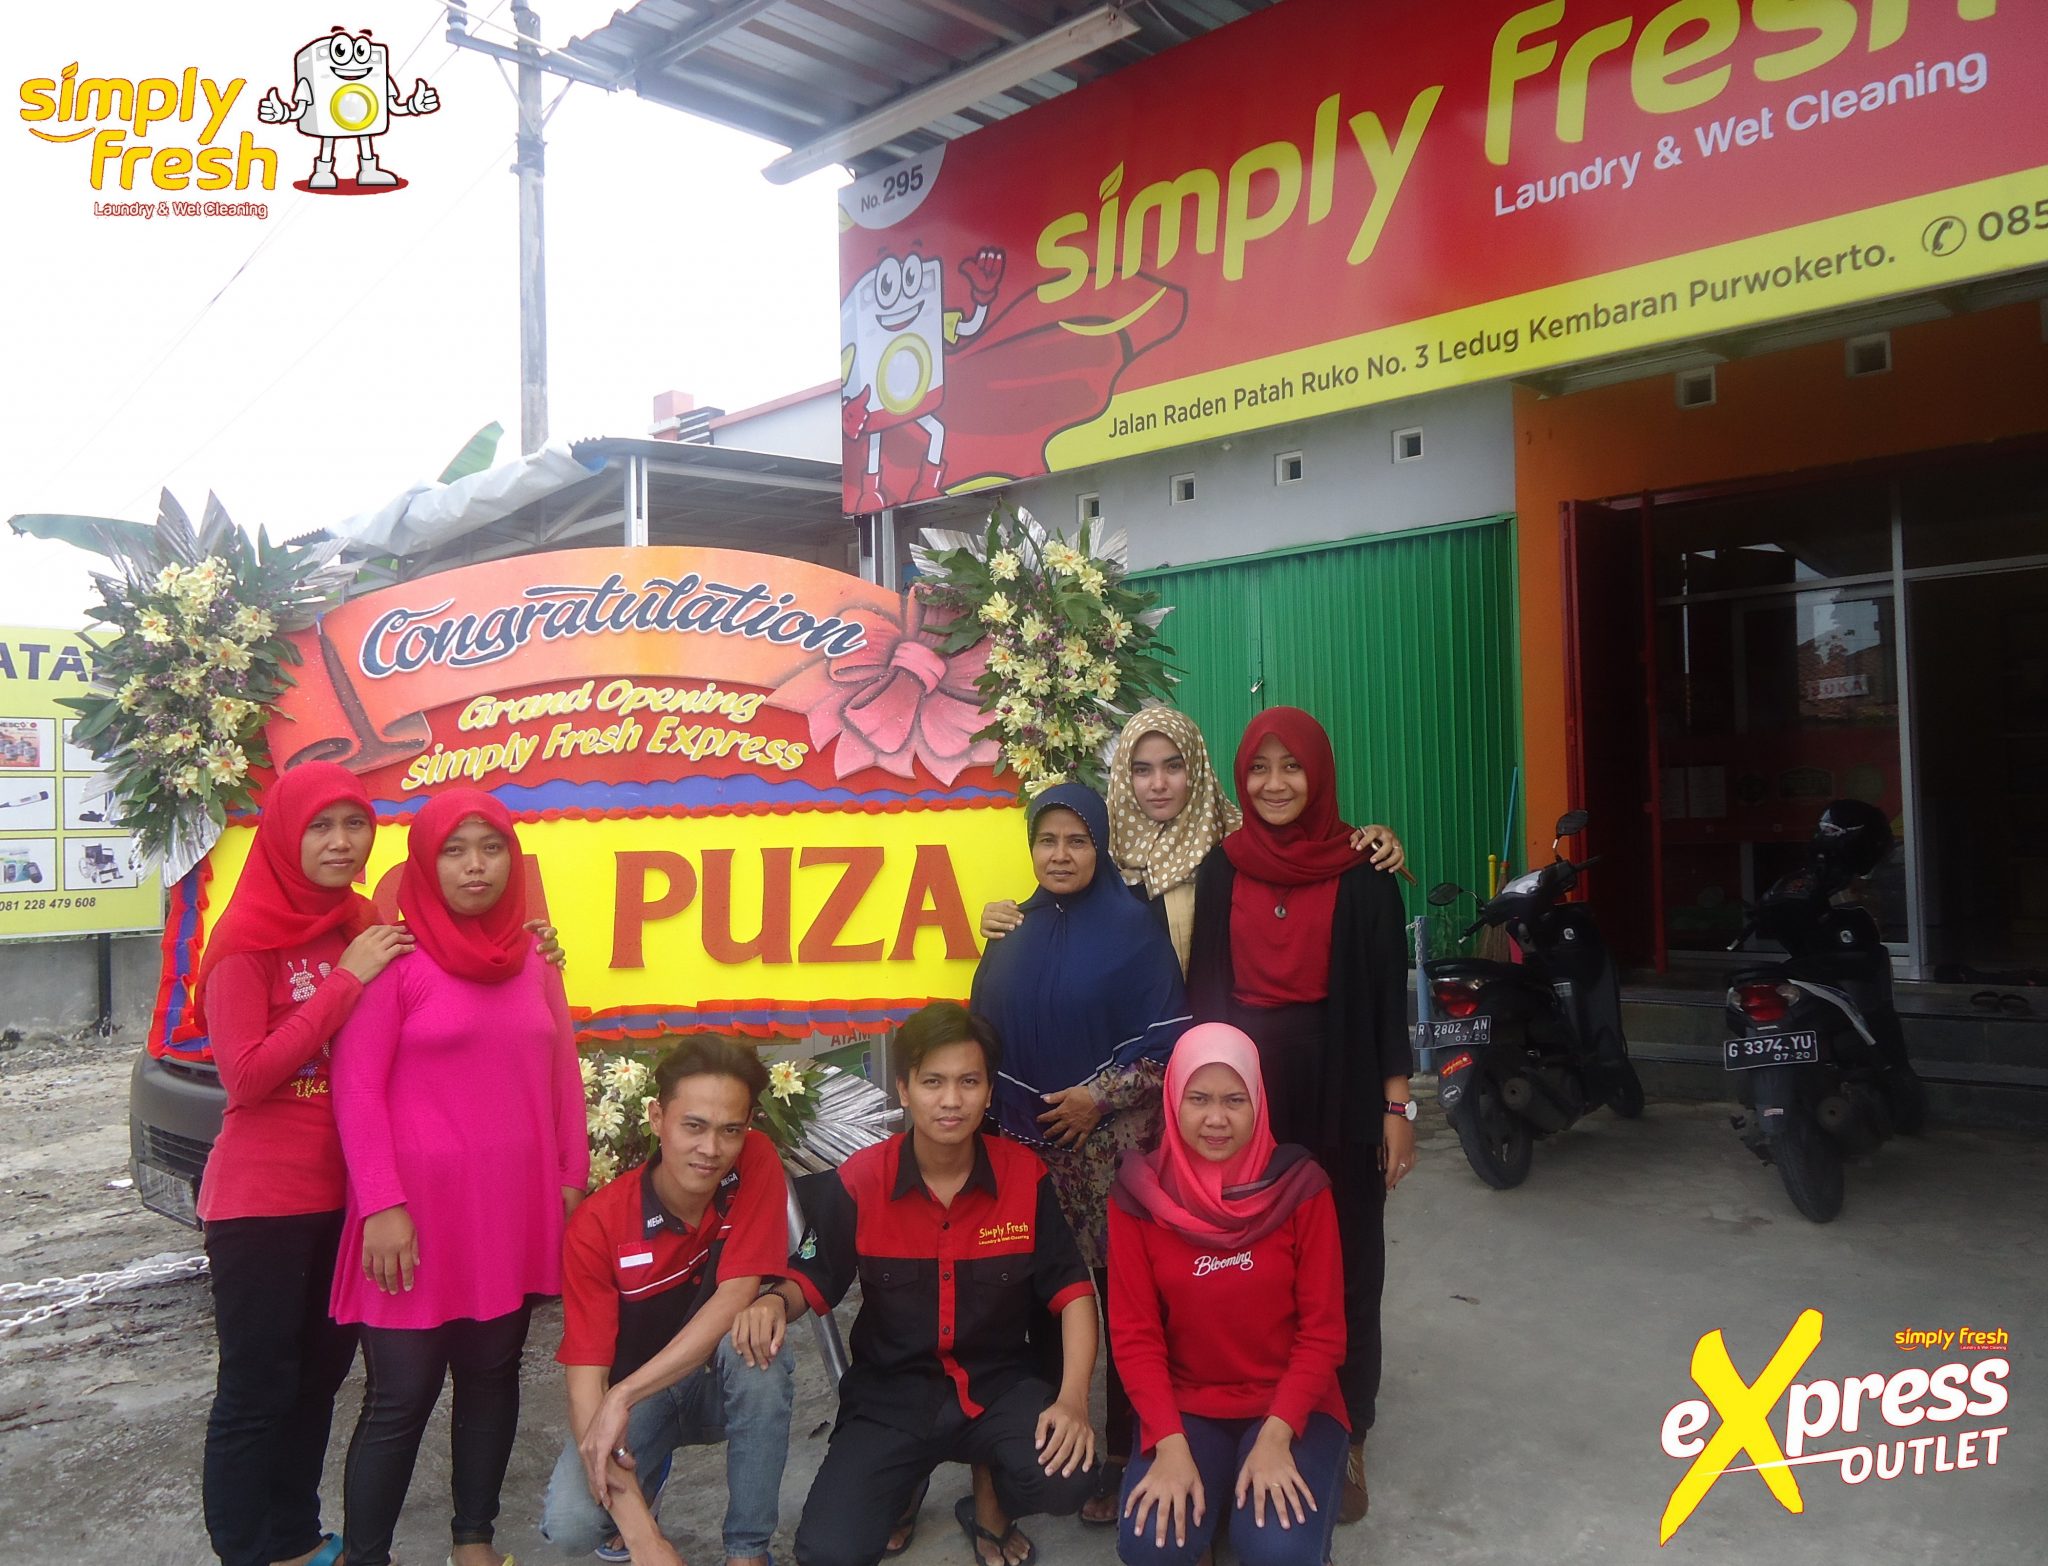 Express Outlet Simply Fresh Laundry 295 di Purwokerto